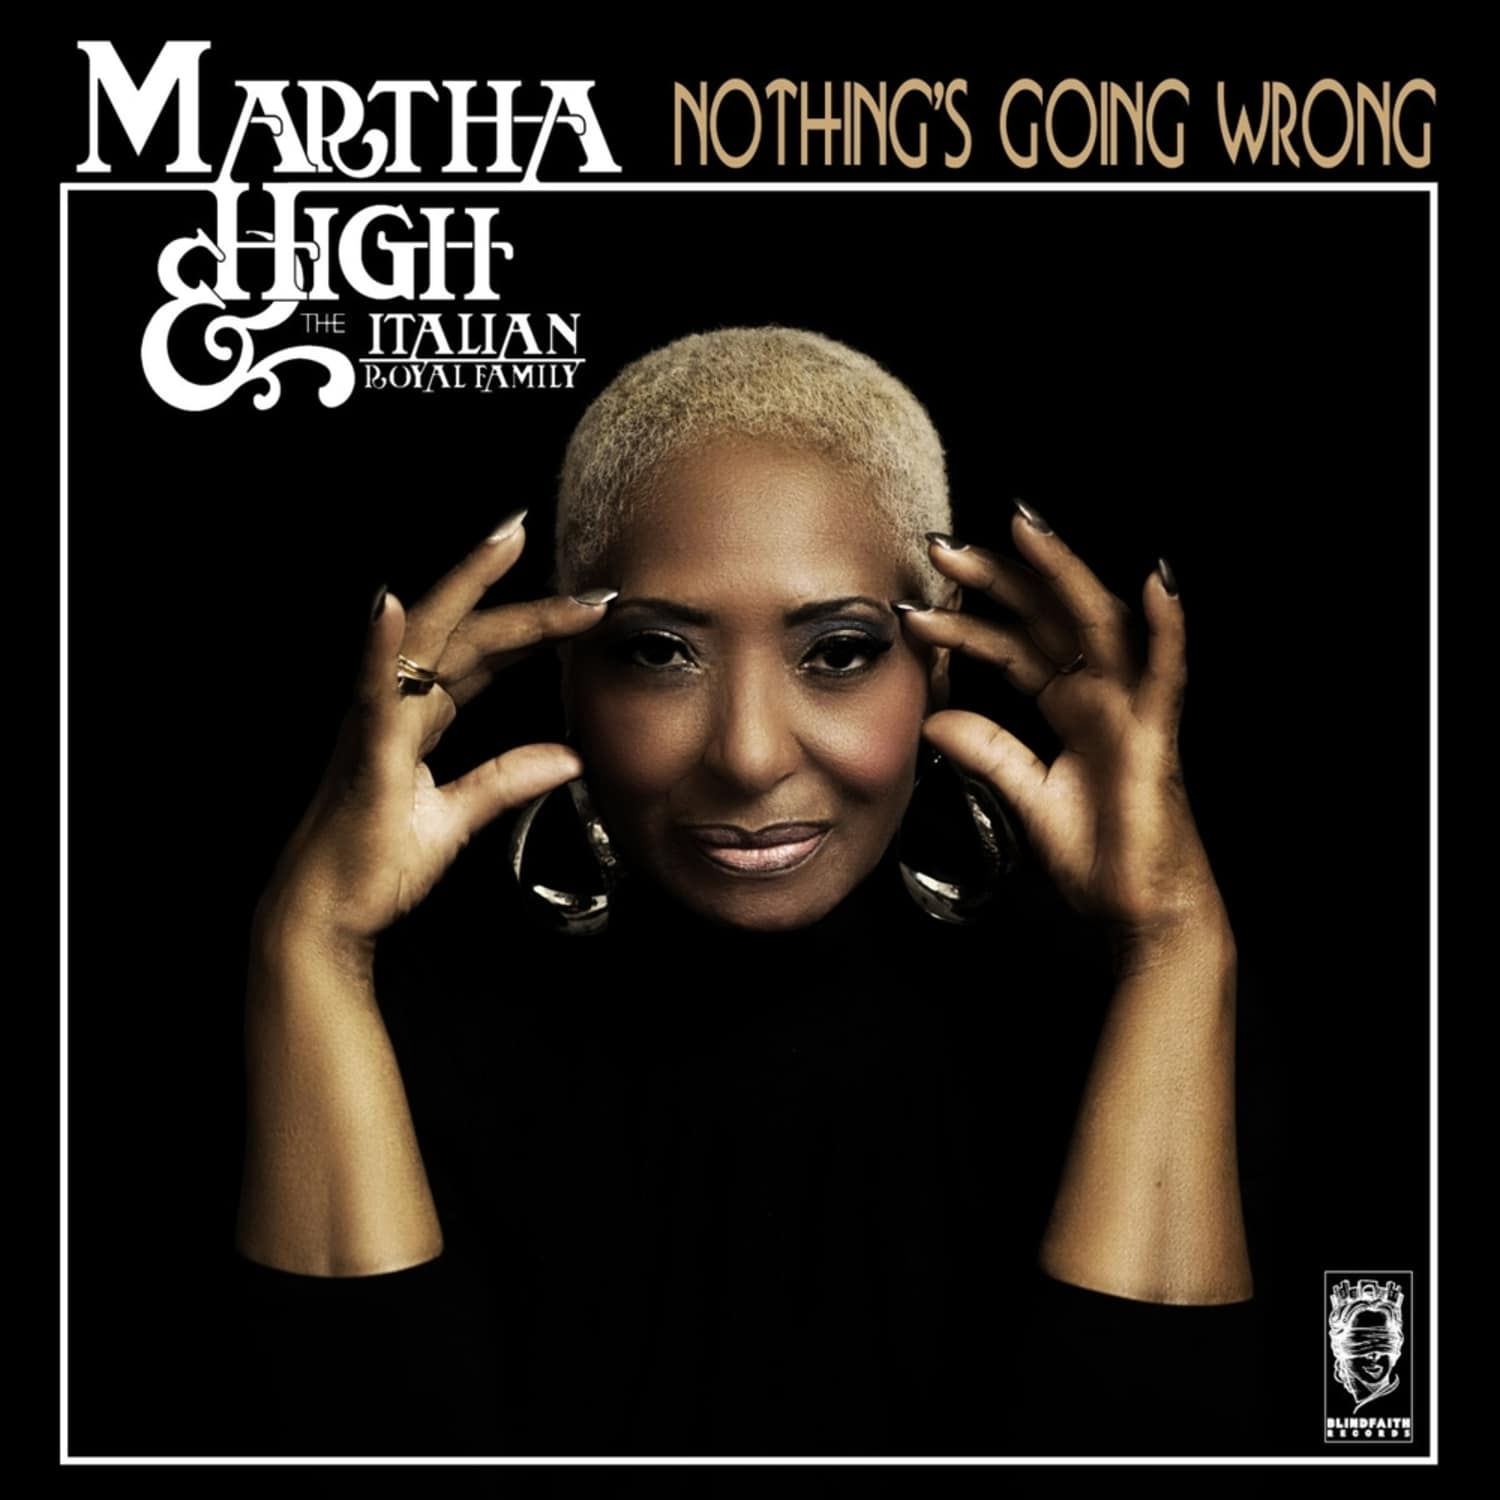 Martha High / The Italian Royal Family - NOTHING S GOING WRONG 